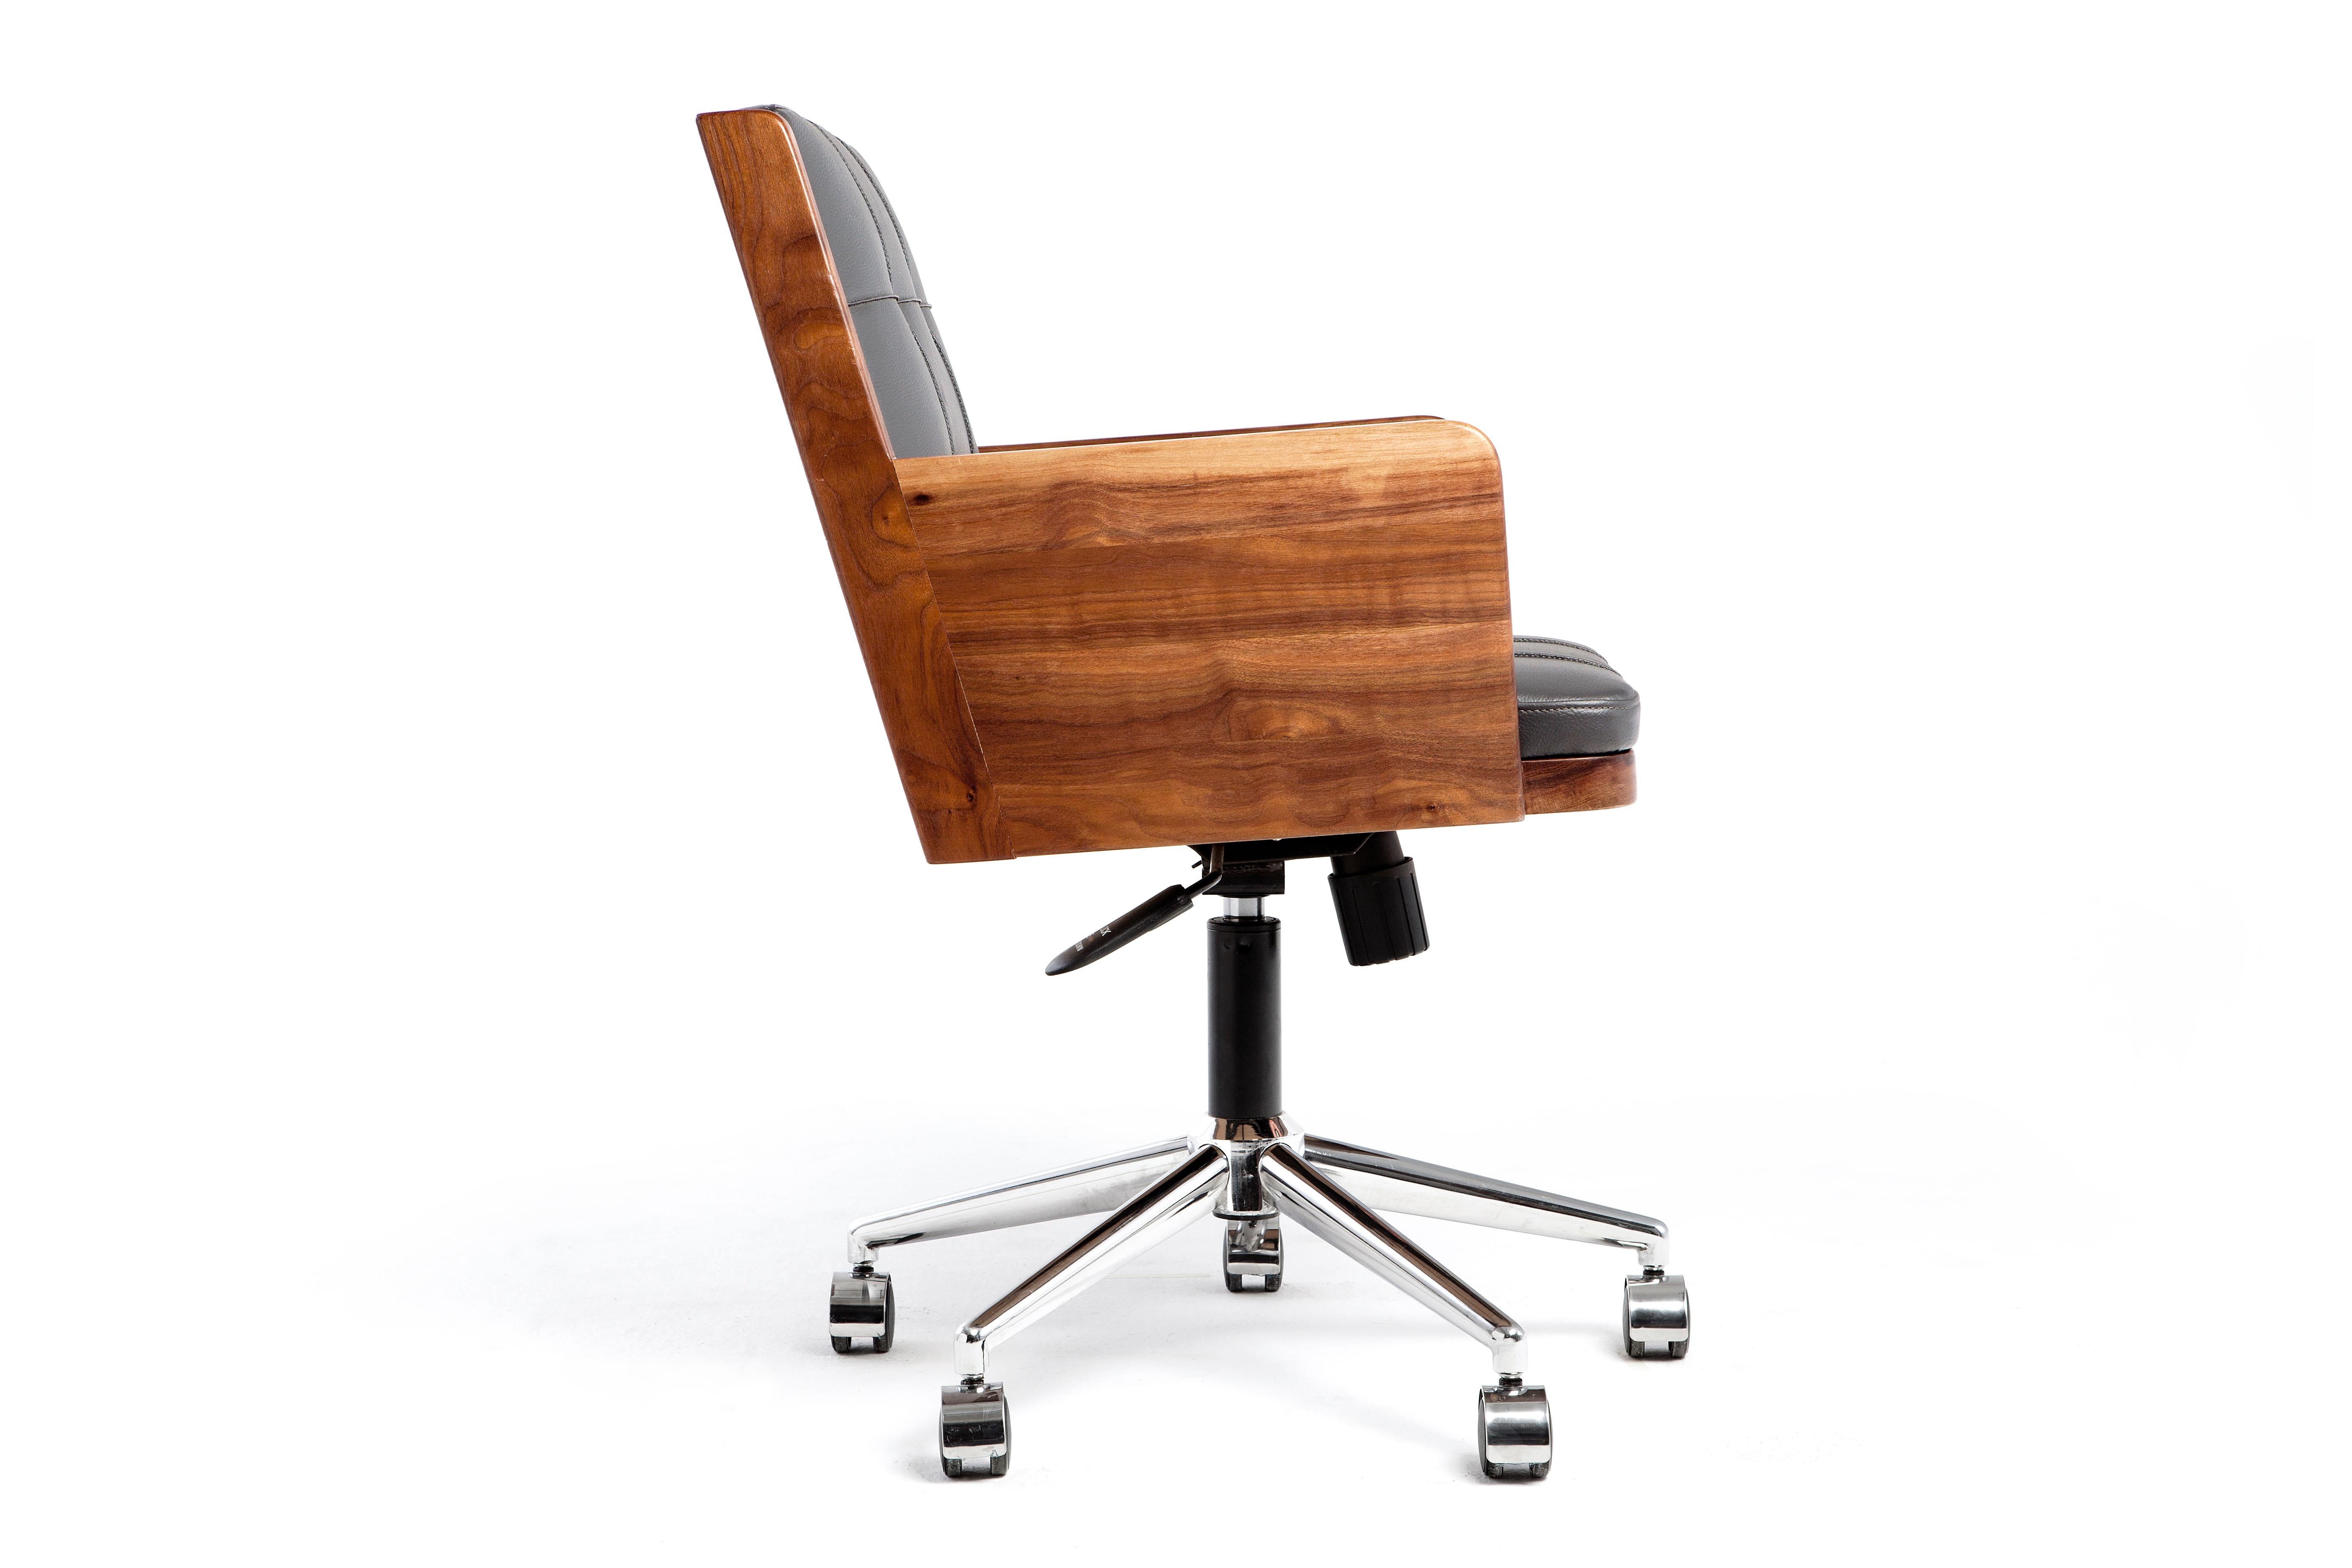 Darwin added wheels to the office chair in the 19th century.
In the 1970s ergonomics was added to design criteria.
Today, it is the key element for those who spend long hours in the office.
Office chair consists of a solid walnut/oak/plywood body,